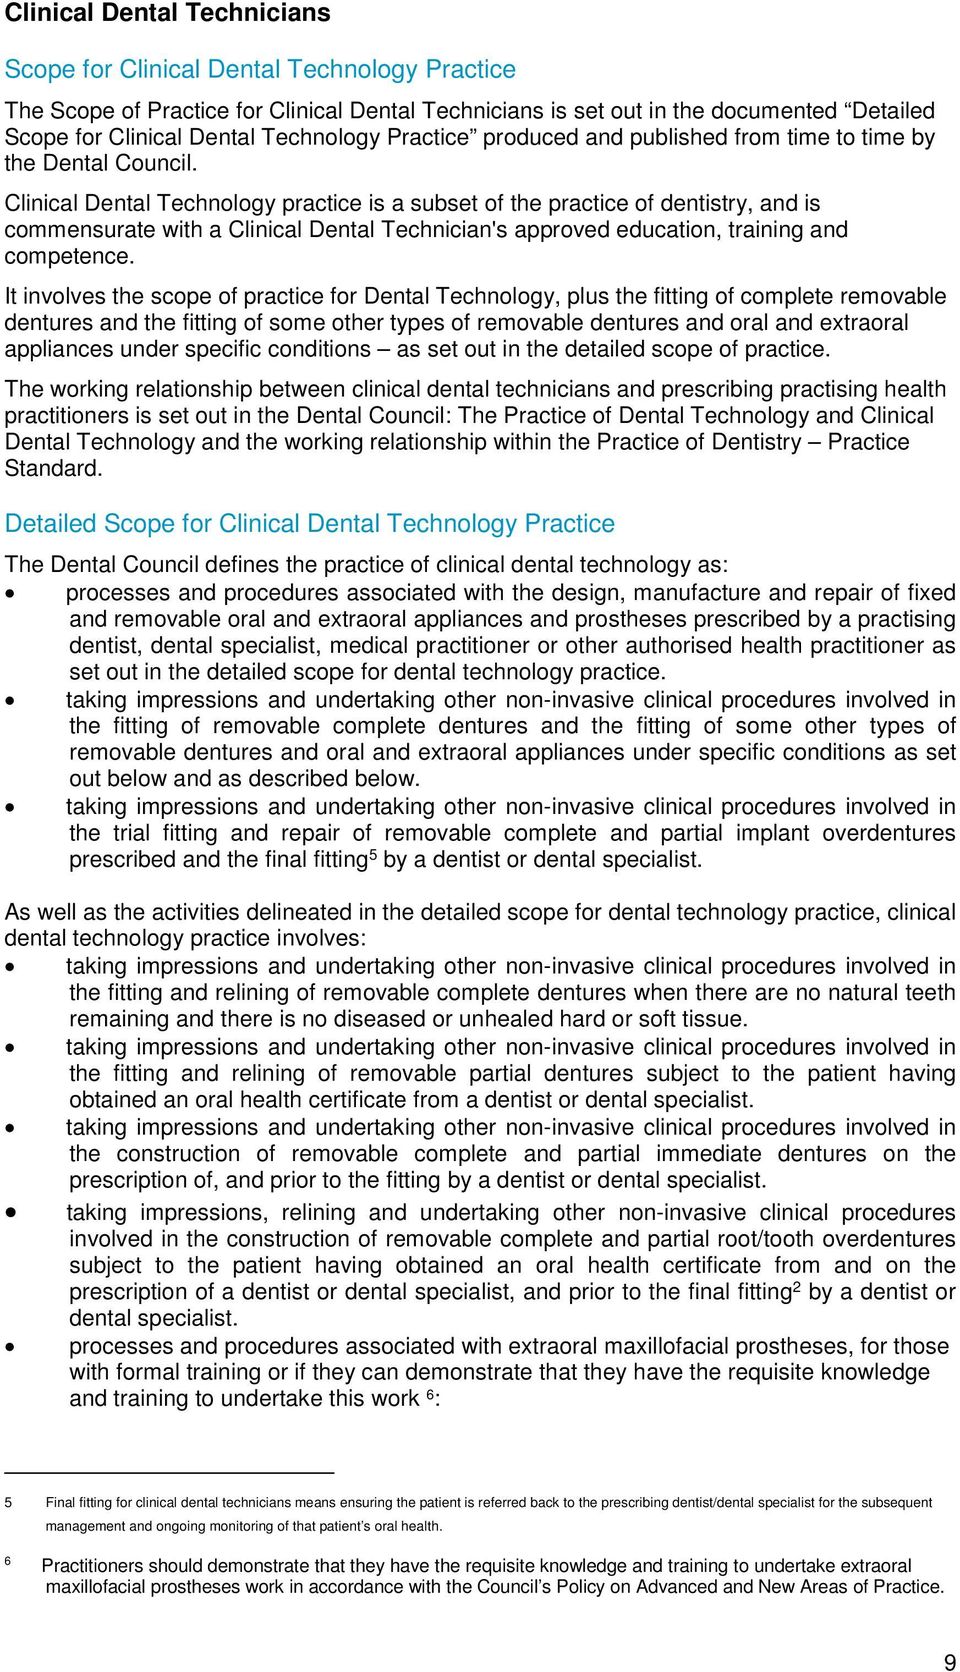 Clinical Dental Technology practice is a subset of the practice of dentistry, and is commensurate with a Clinical Dental Technician's approved education, training and competence.